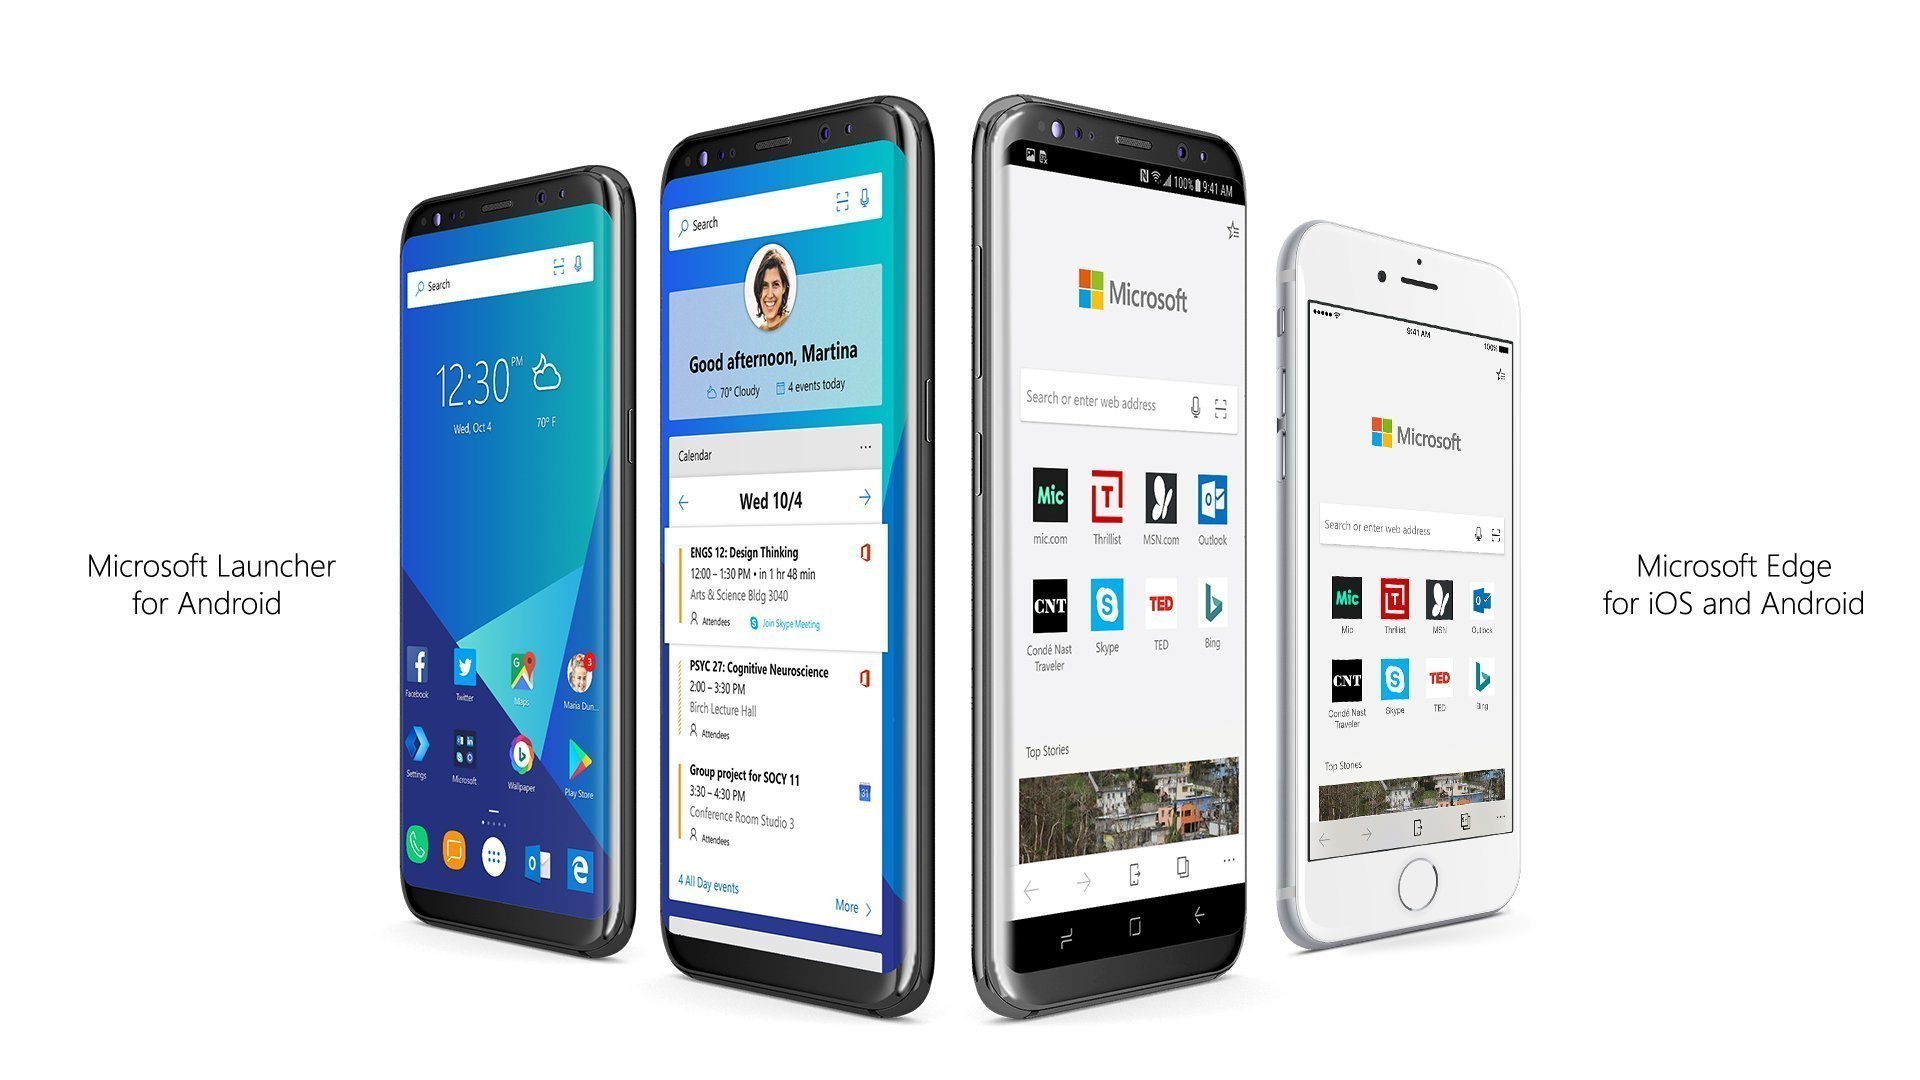 New Microsoft Launcher 5.0.1.46982 version for Android - November 5 caaf609f6273fcc3e9545708498dcded.jpg